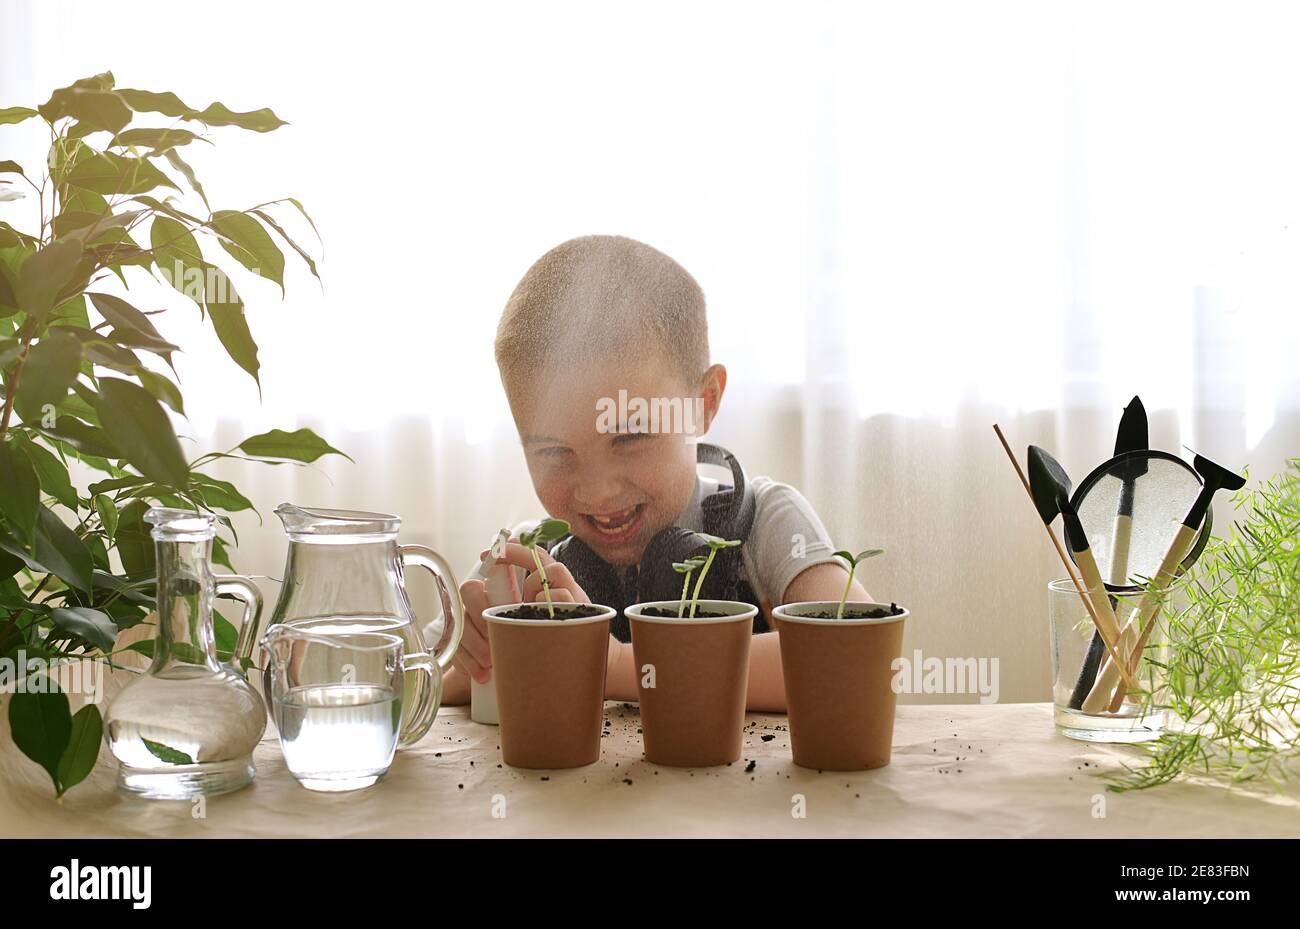 A caring child sprays with water from a of grown green cucumber. He laughs merrily, smiling with a toothless smile, squirts, indulges and misbehaves. Home gardening. Care and cultivation of plants. Stock Photo